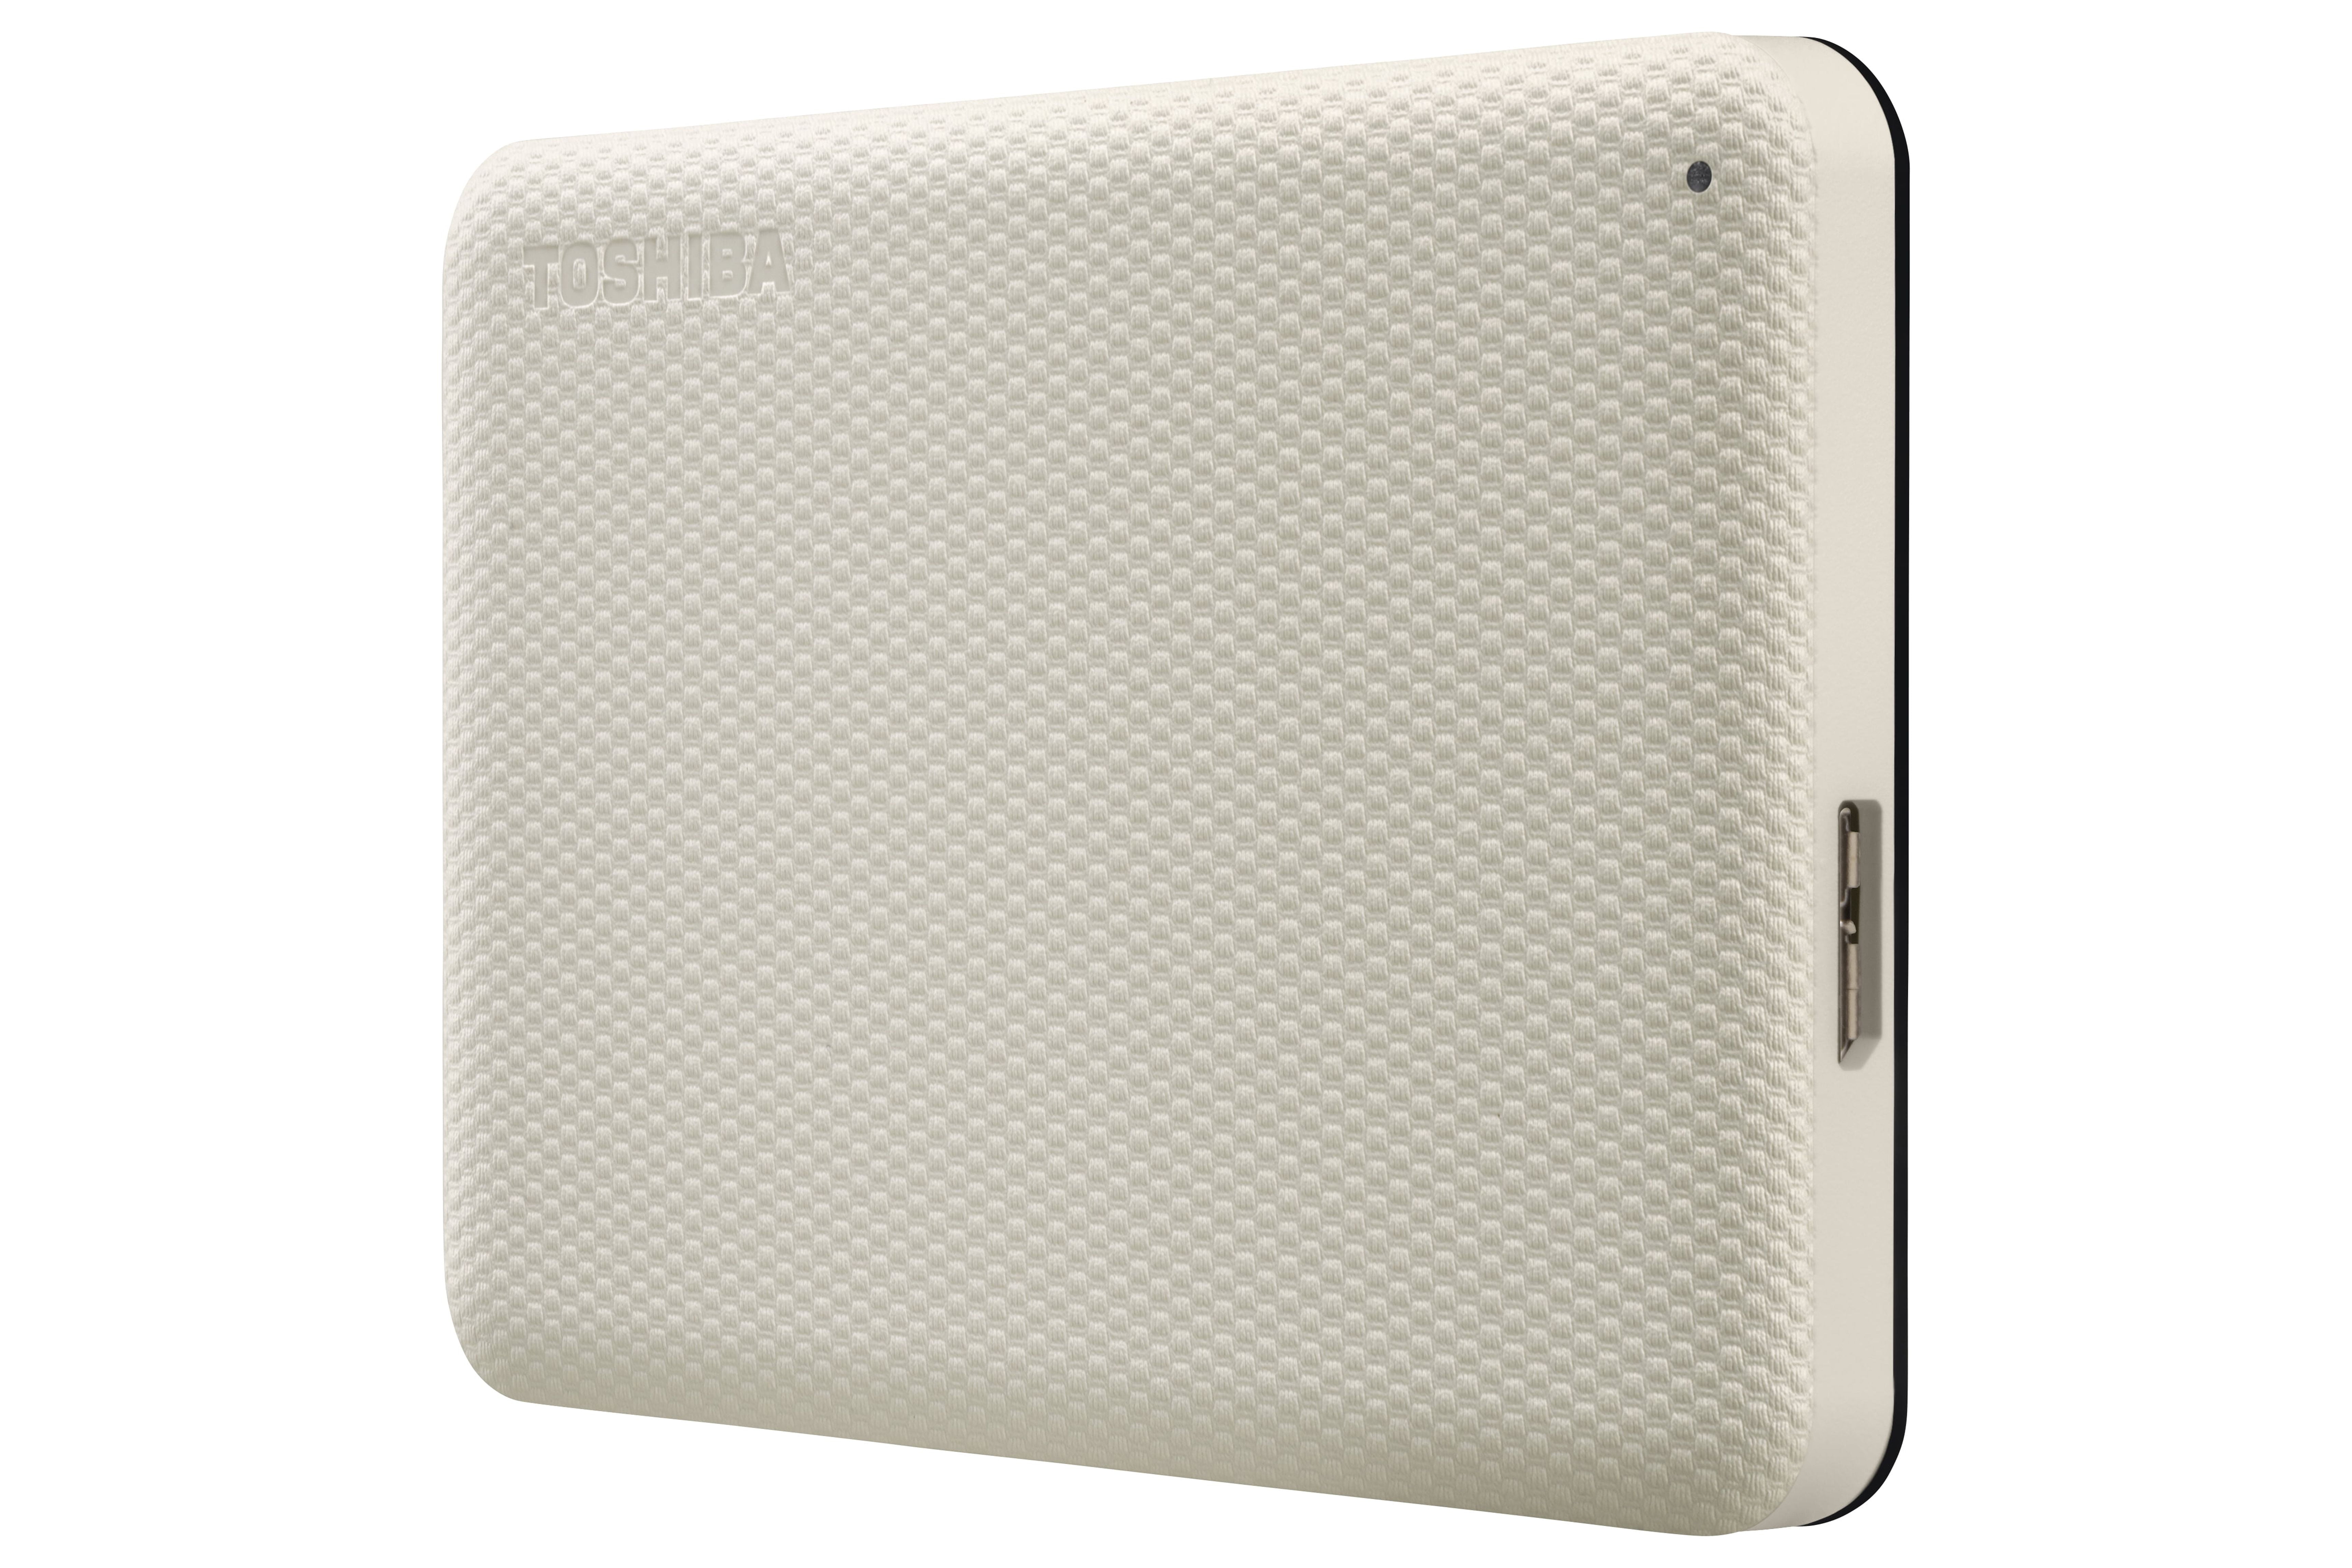 USB-A External USB 3.0 - Plus Hard USB-C both White Drive Advance (Includes 2TB - Toshiba and Cables) CANVIO Portable